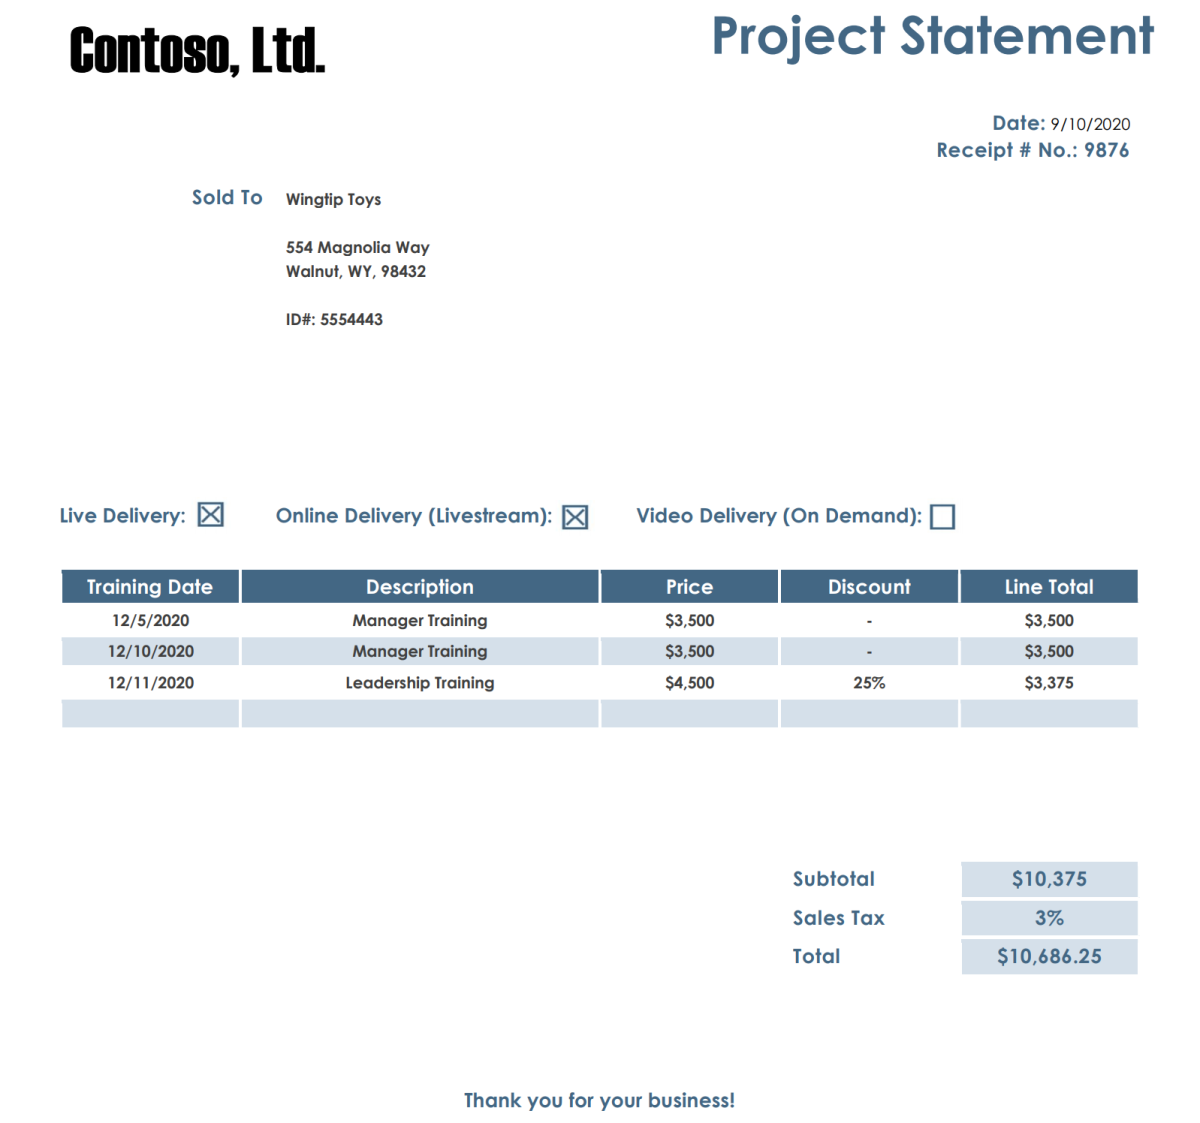 Screenshot of Contoso project statement document with a table.